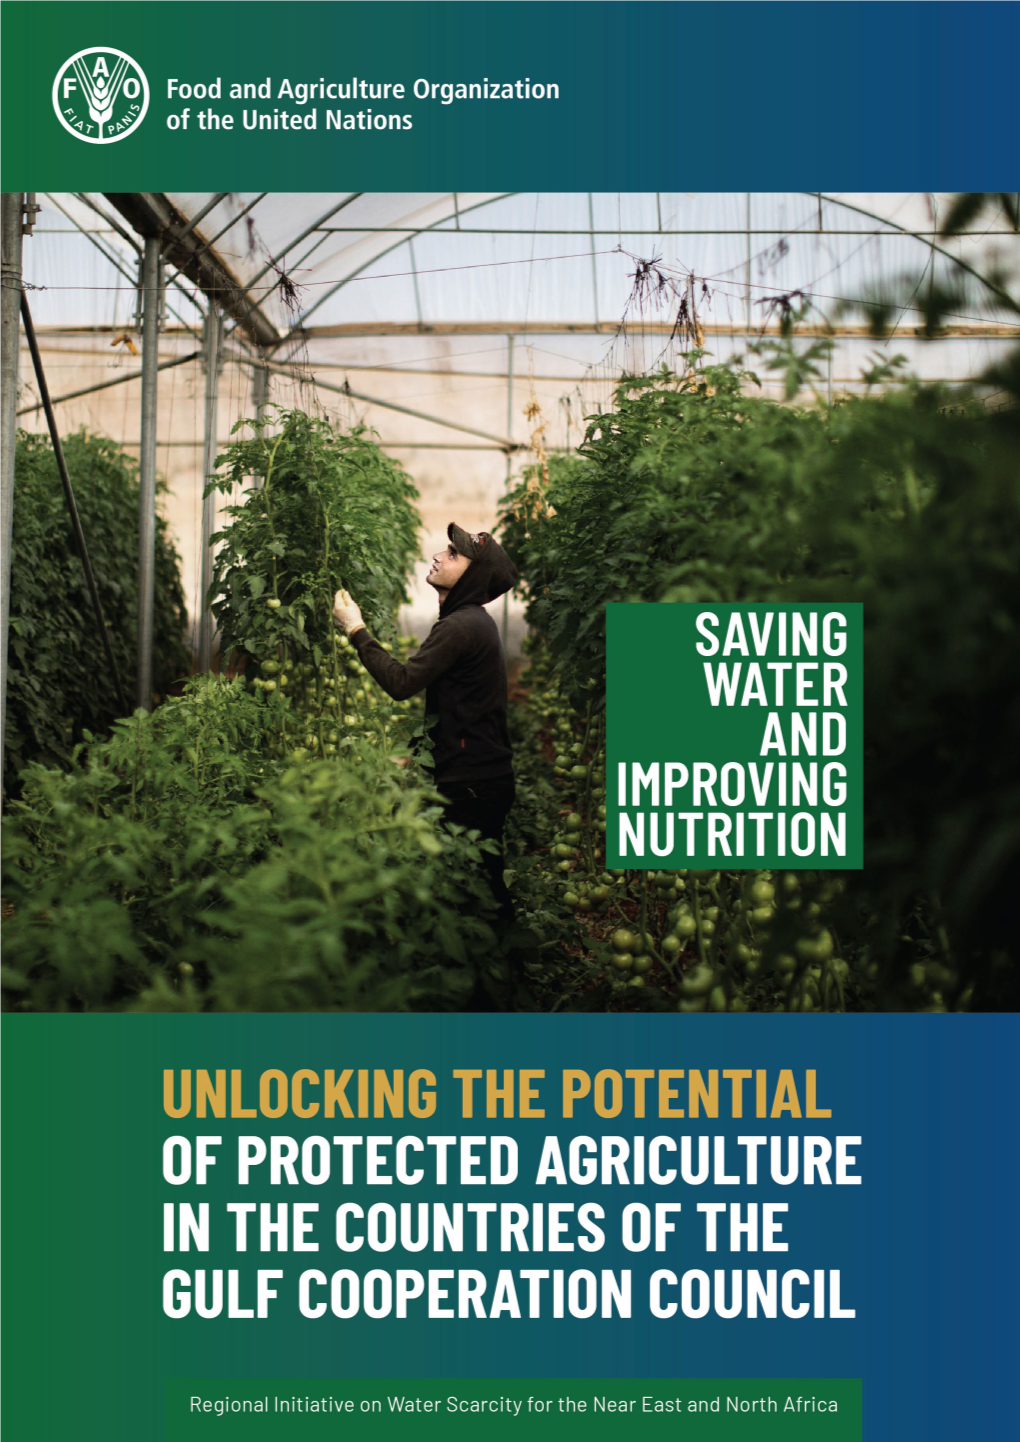 Protected Agriculture in the Gcc Countries